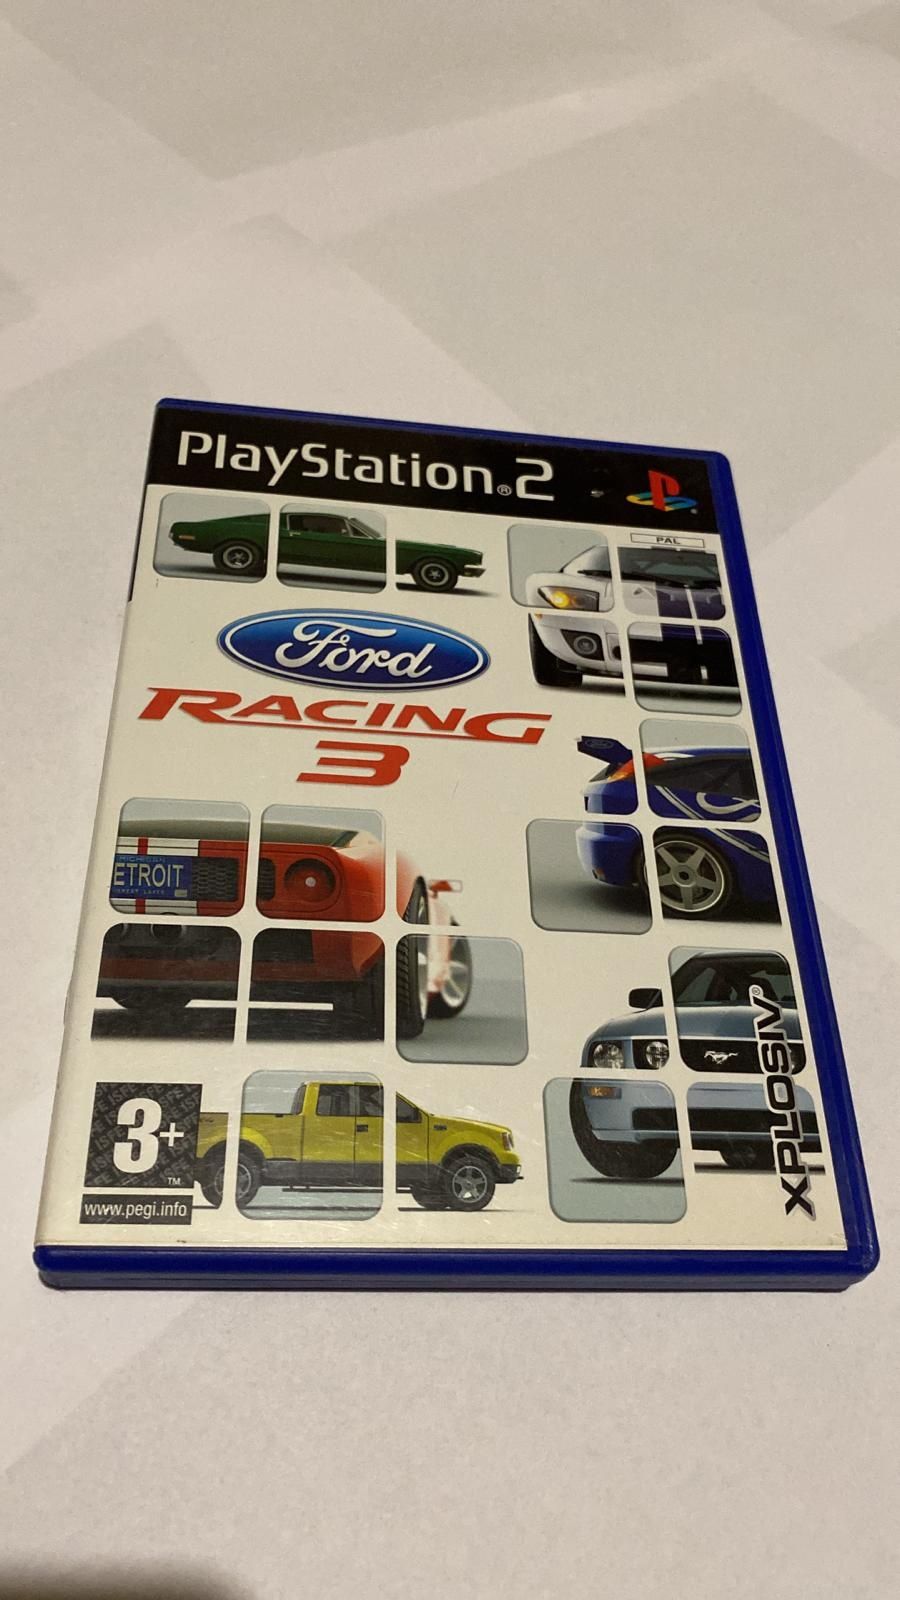 Ford Racing 3 PS2